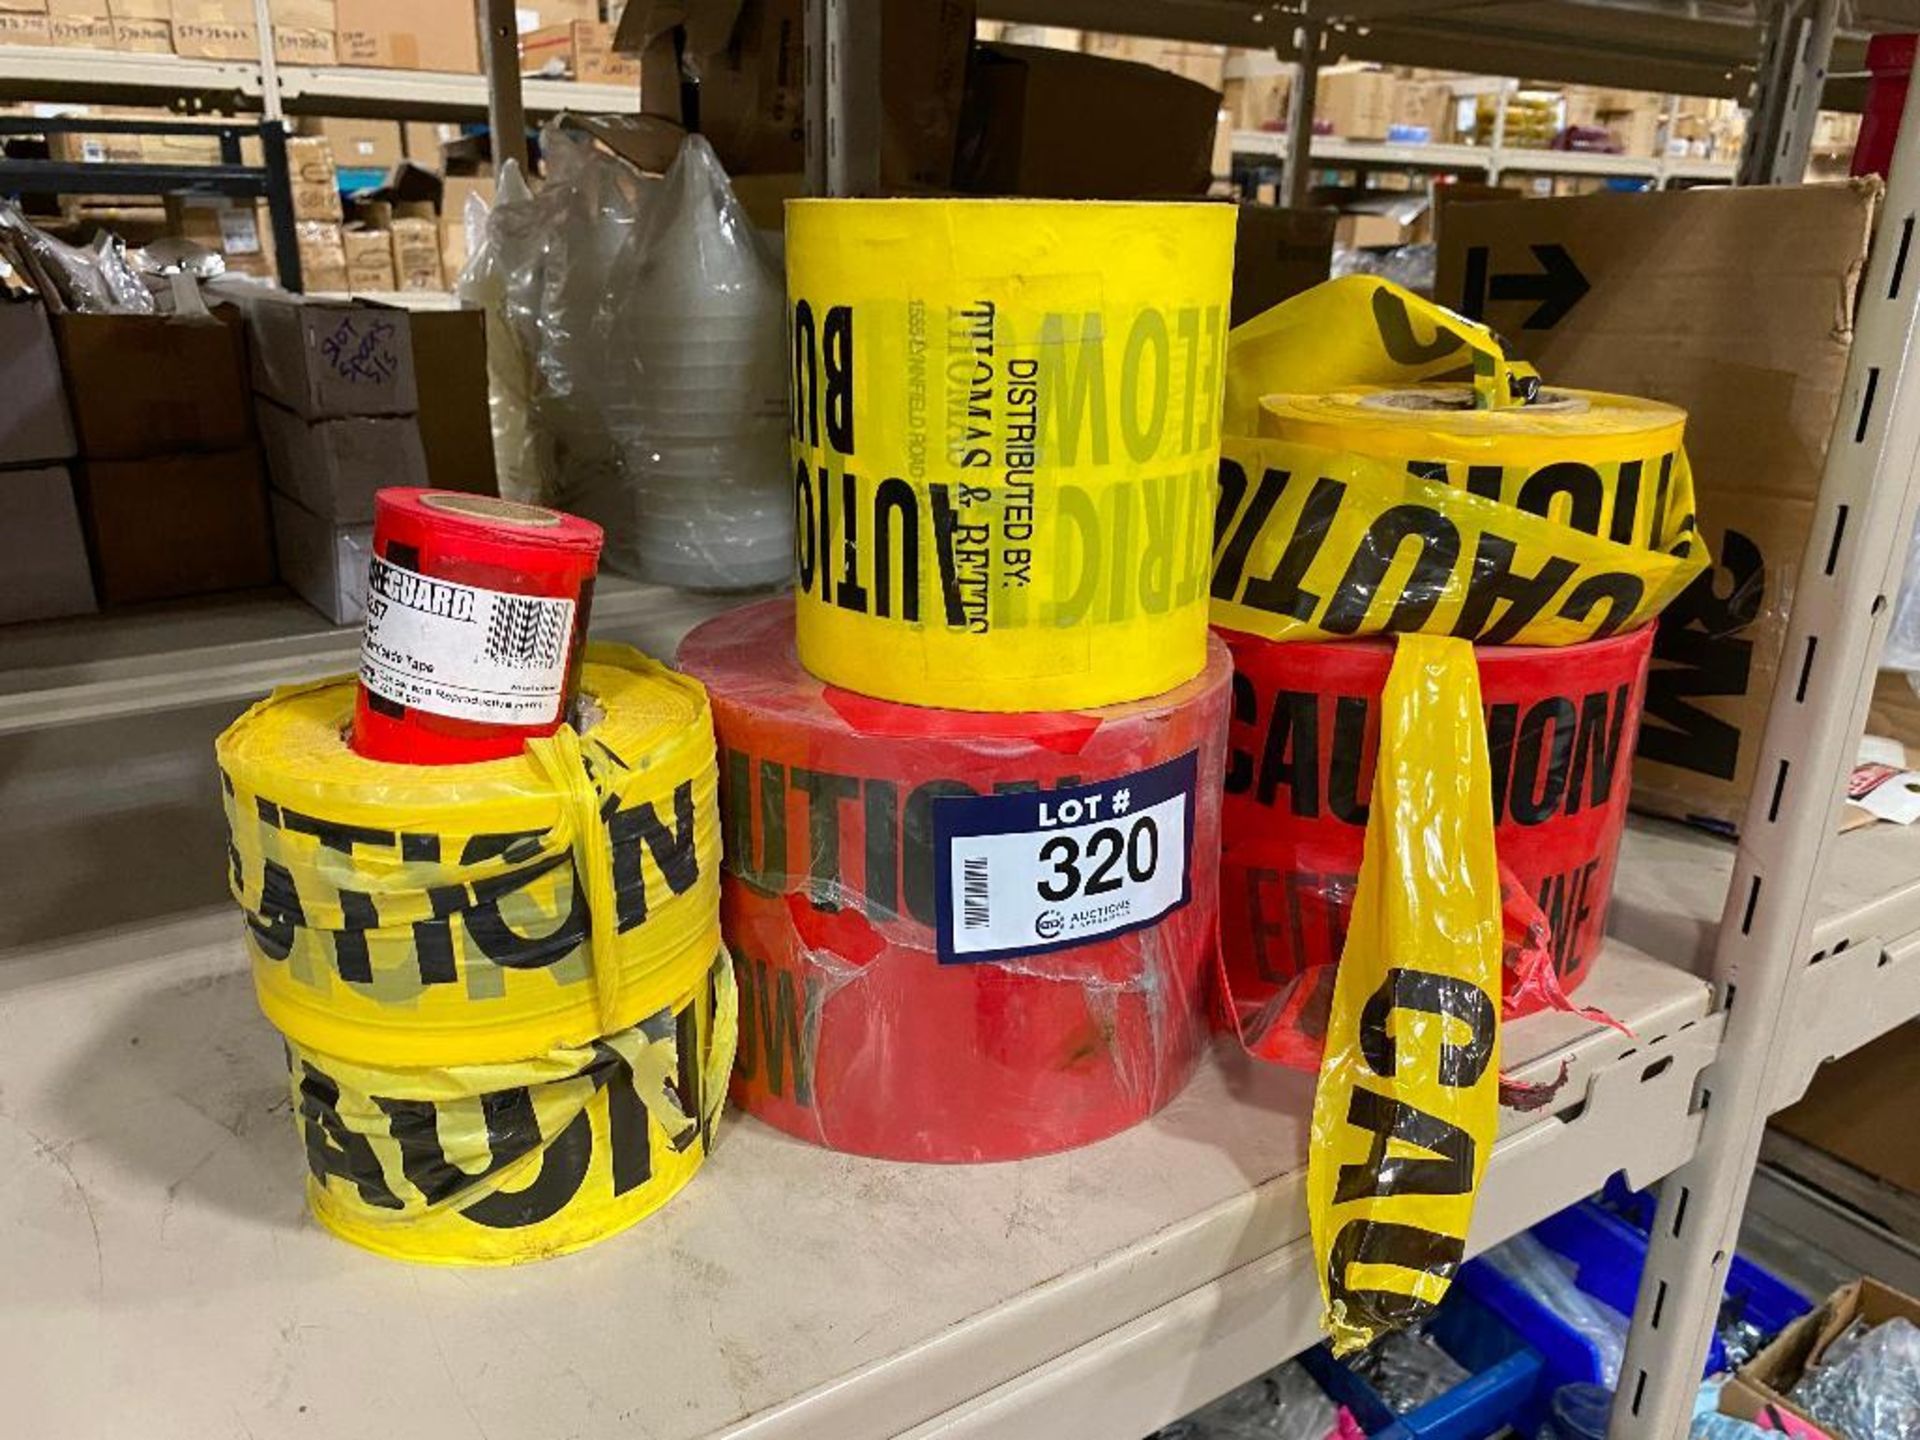 Lot of Asst. Safety Tape including Danger Tape, Caution Tape, etc. - Image 2 of 2